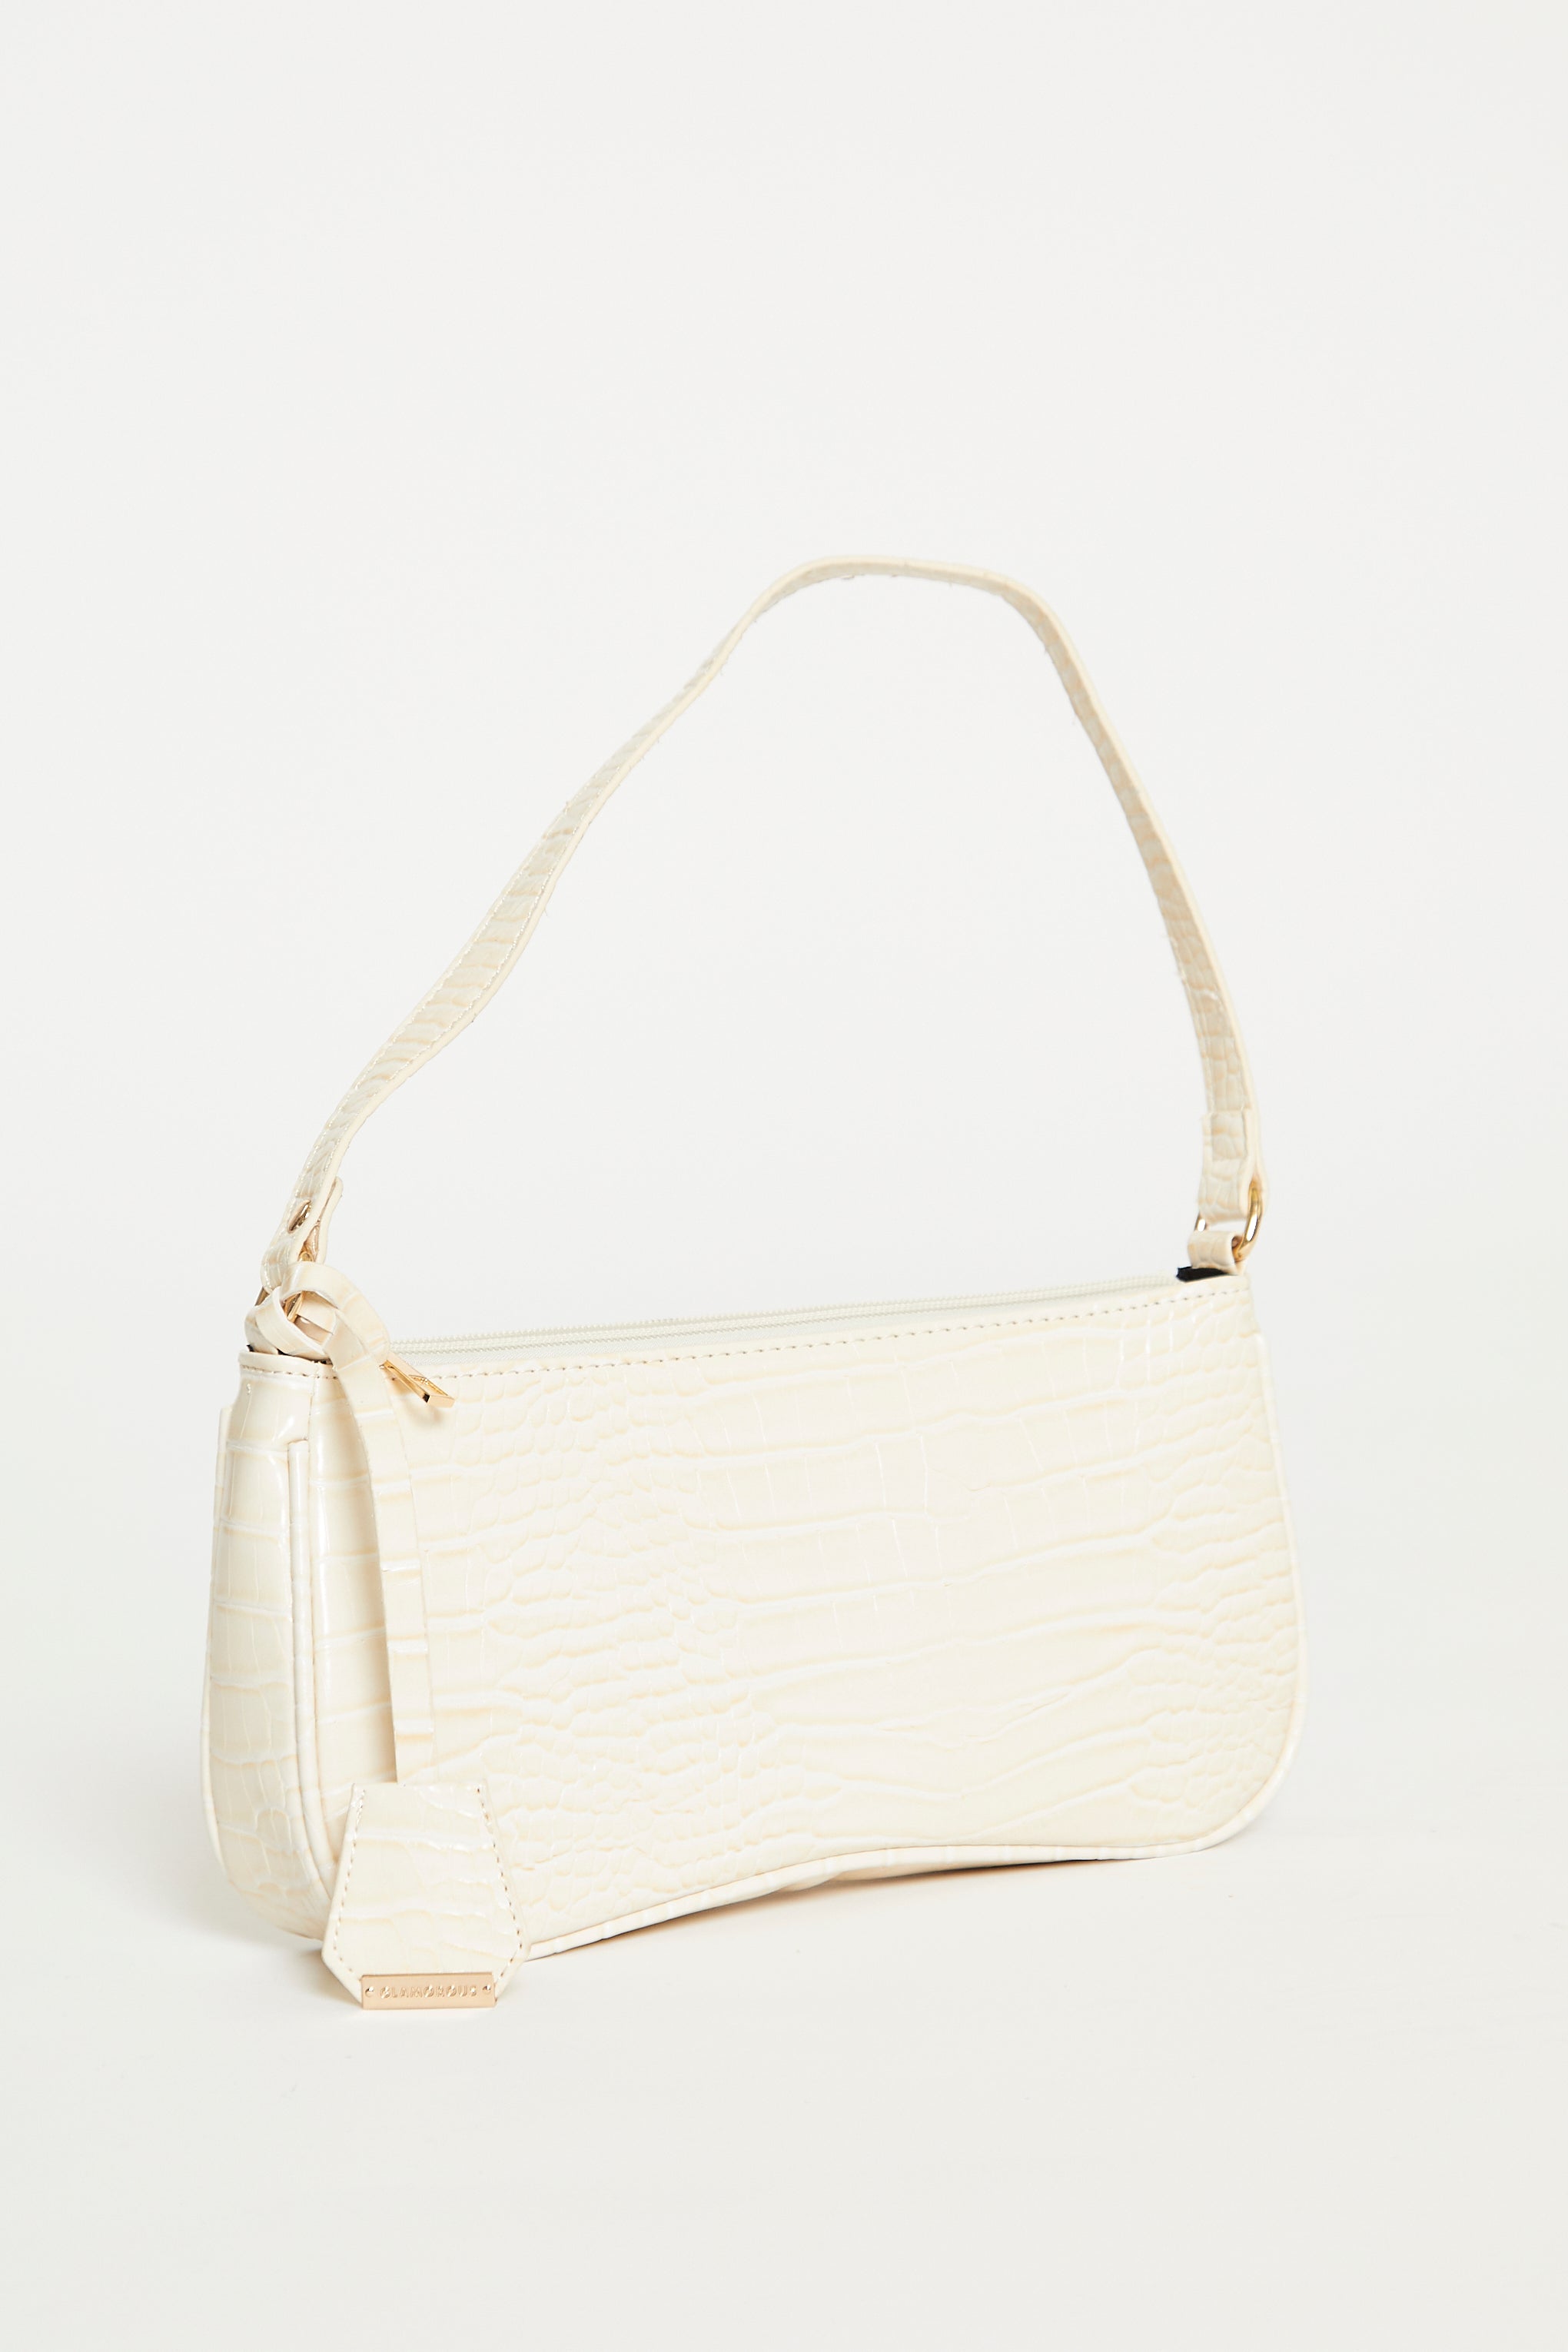 Party Hand Bag Ladies Off White Purse, Size: 8x10x2.5inch (hxlxw) at Rs 450  in Mumbai